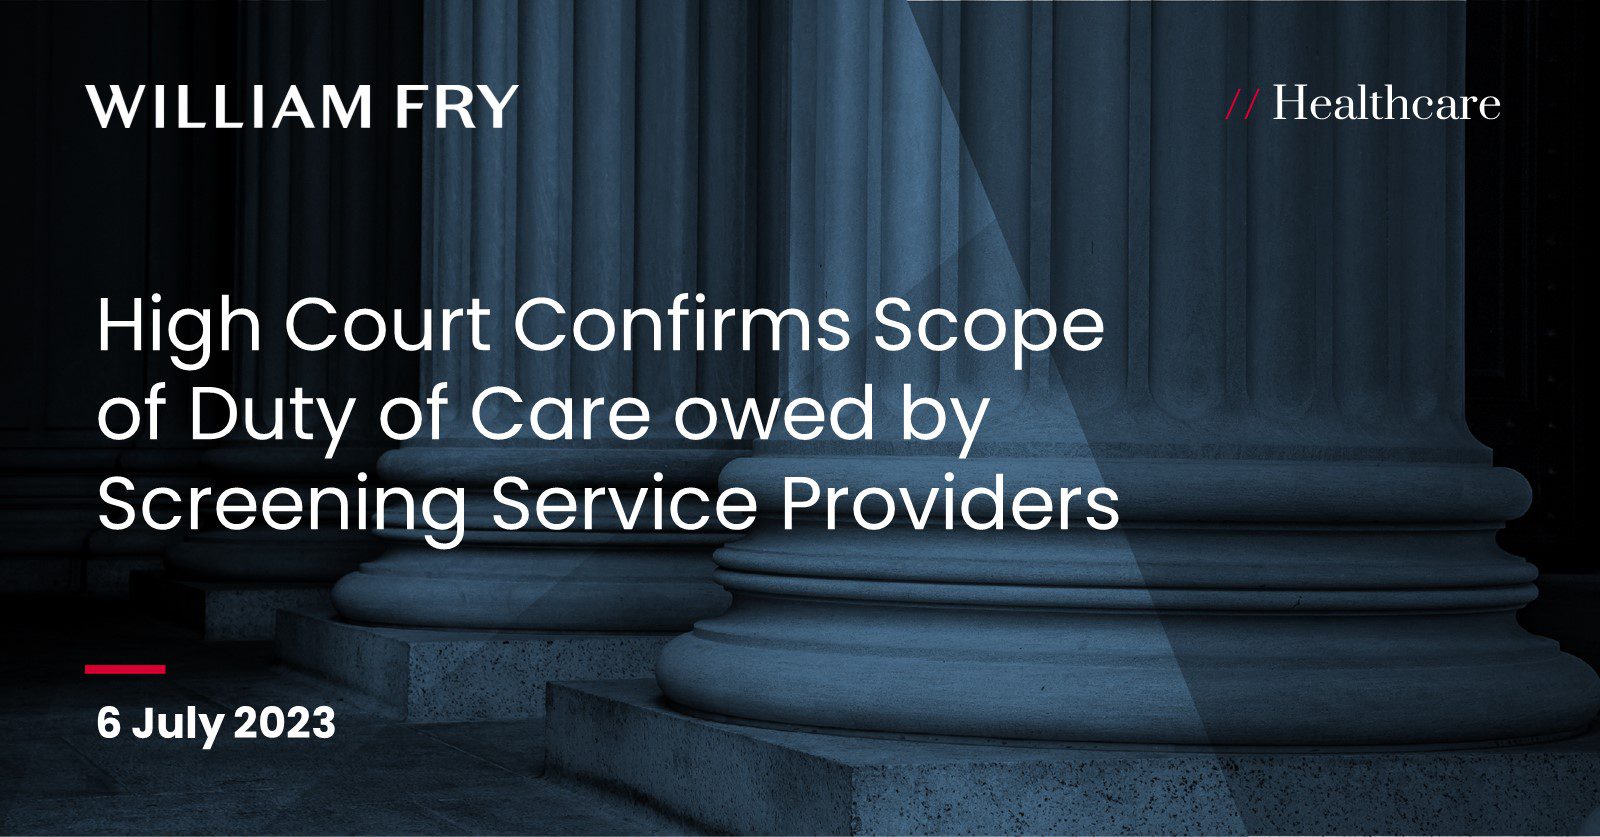 High Court Confirms Scope of Duty of Care owed by Screening Service Providers